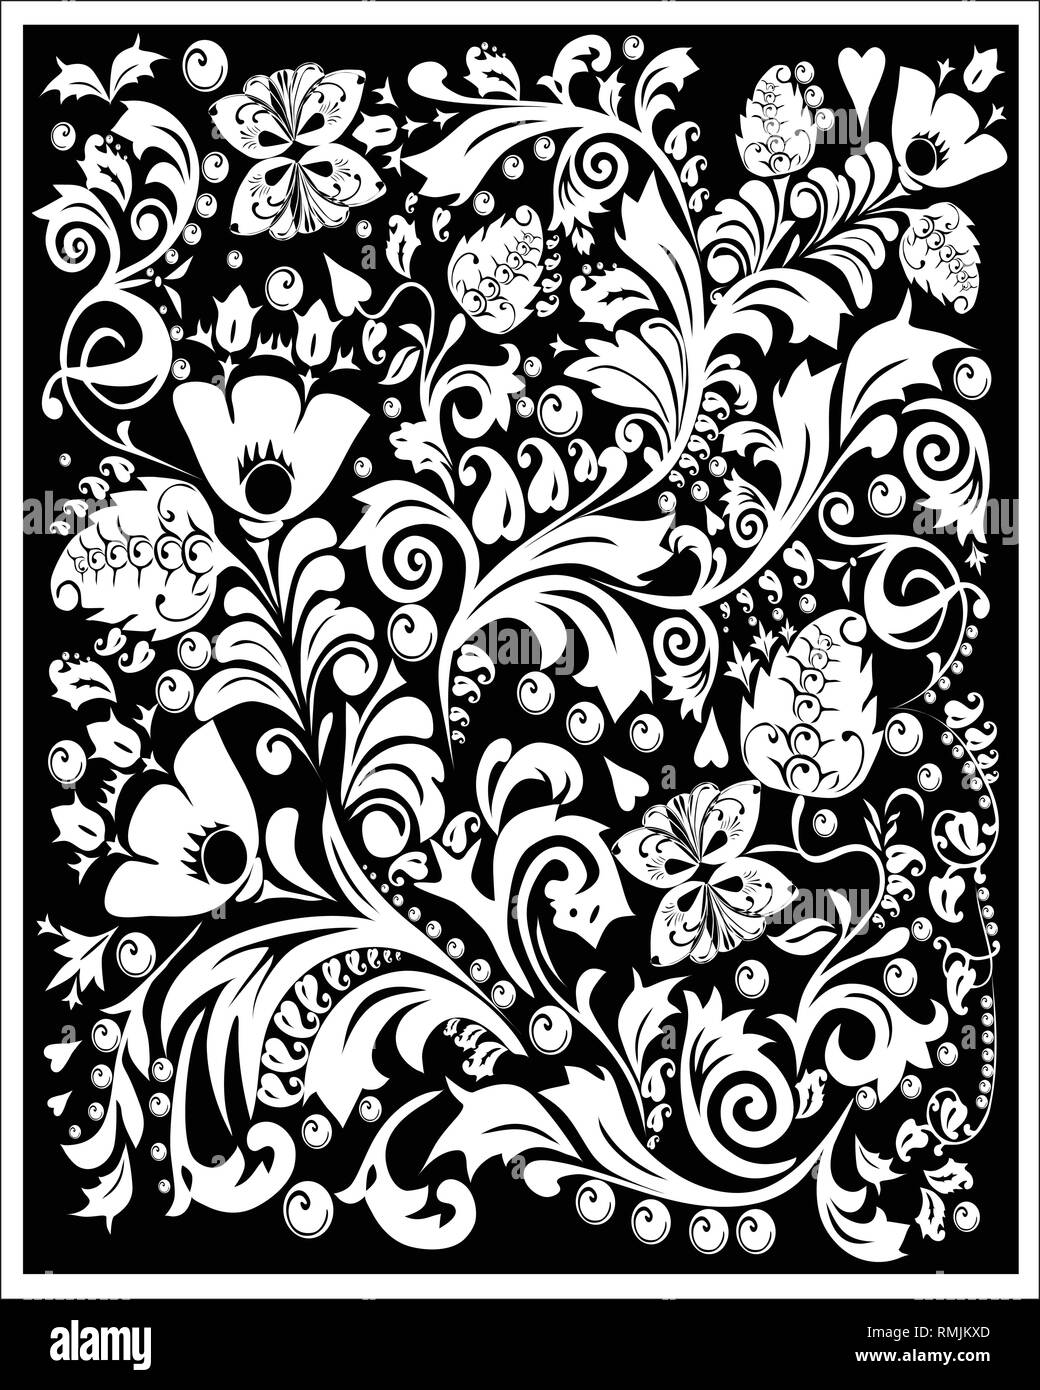 vector design batik patterns for wallpaper, fabric, decoration and other designs. Stock Vector